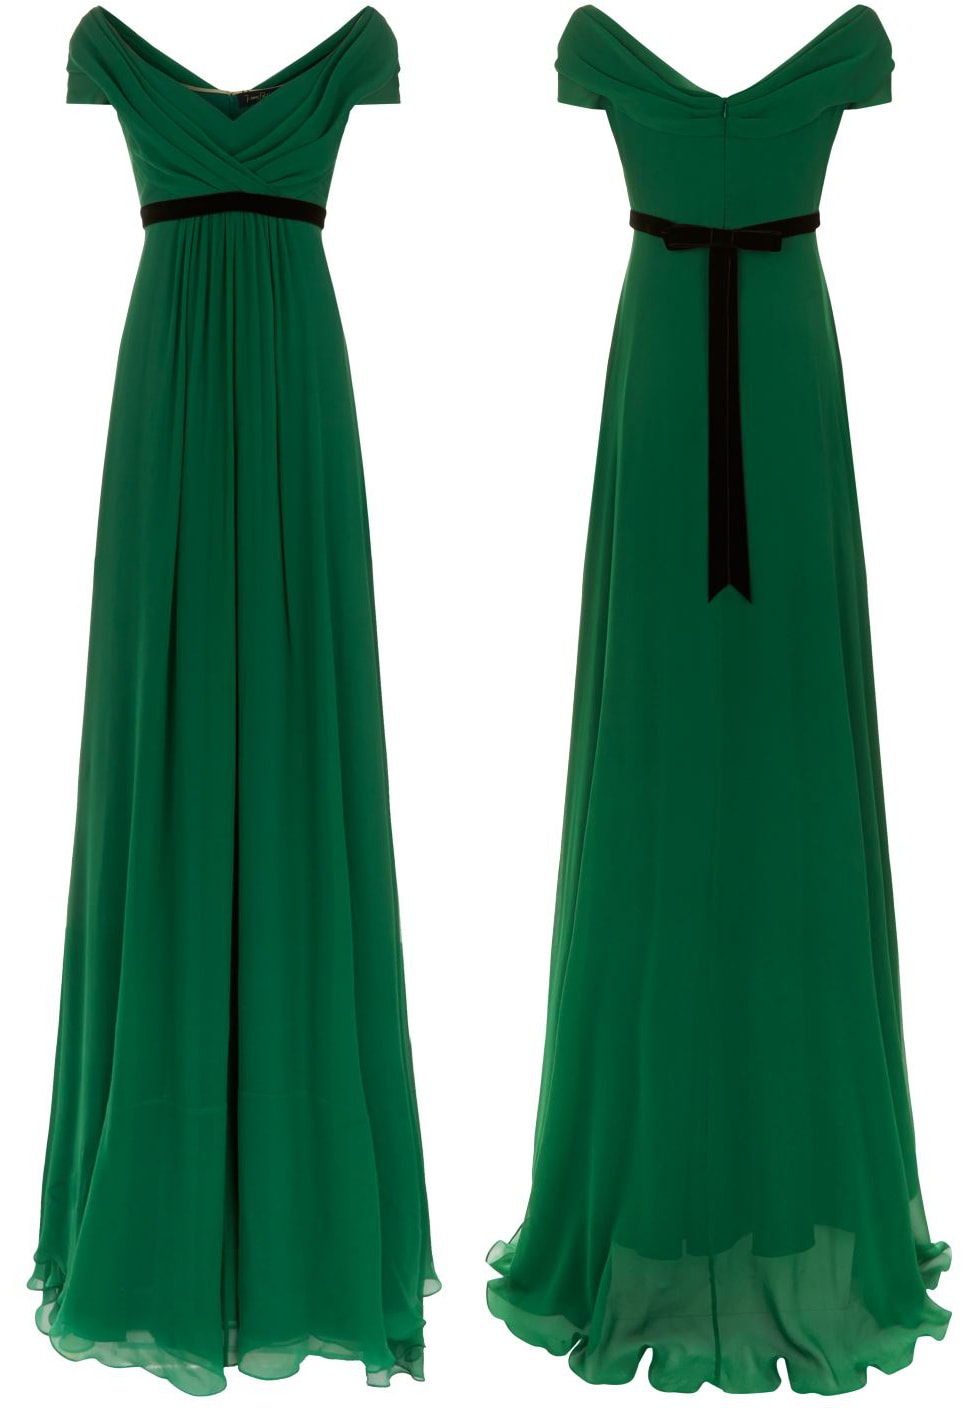 Jenny Packham Lucerne Green Belted Chiffon Gown